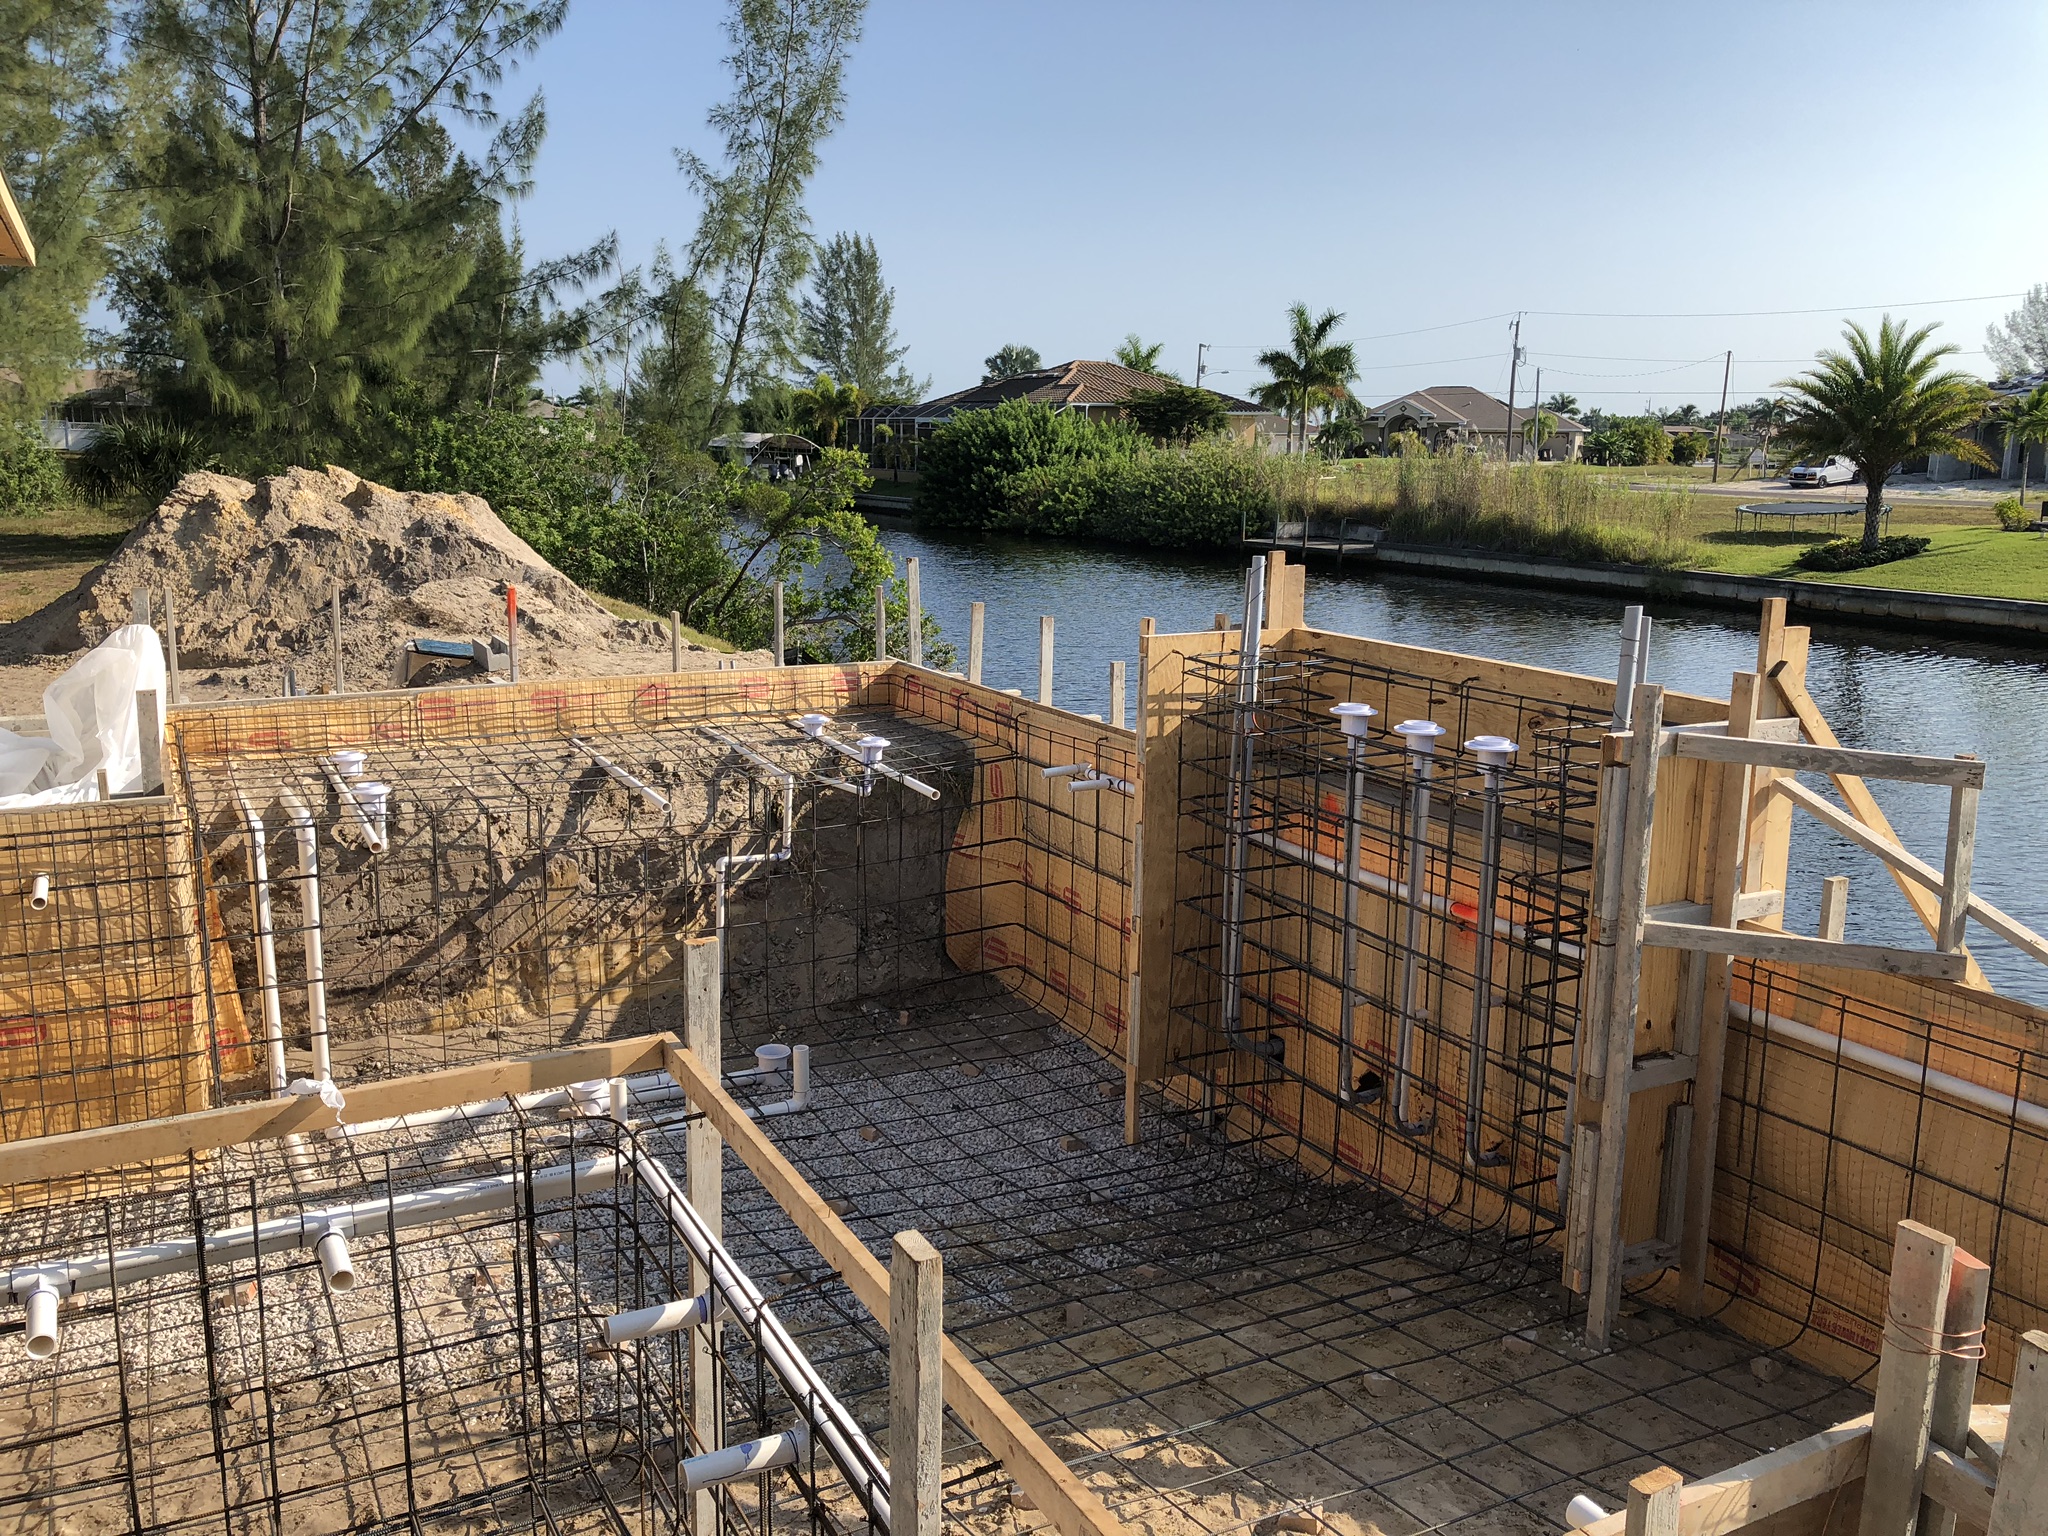 AquaDogs Pools works with homebuilders in Southwest Florida, Cape Coral, and Fort Myers